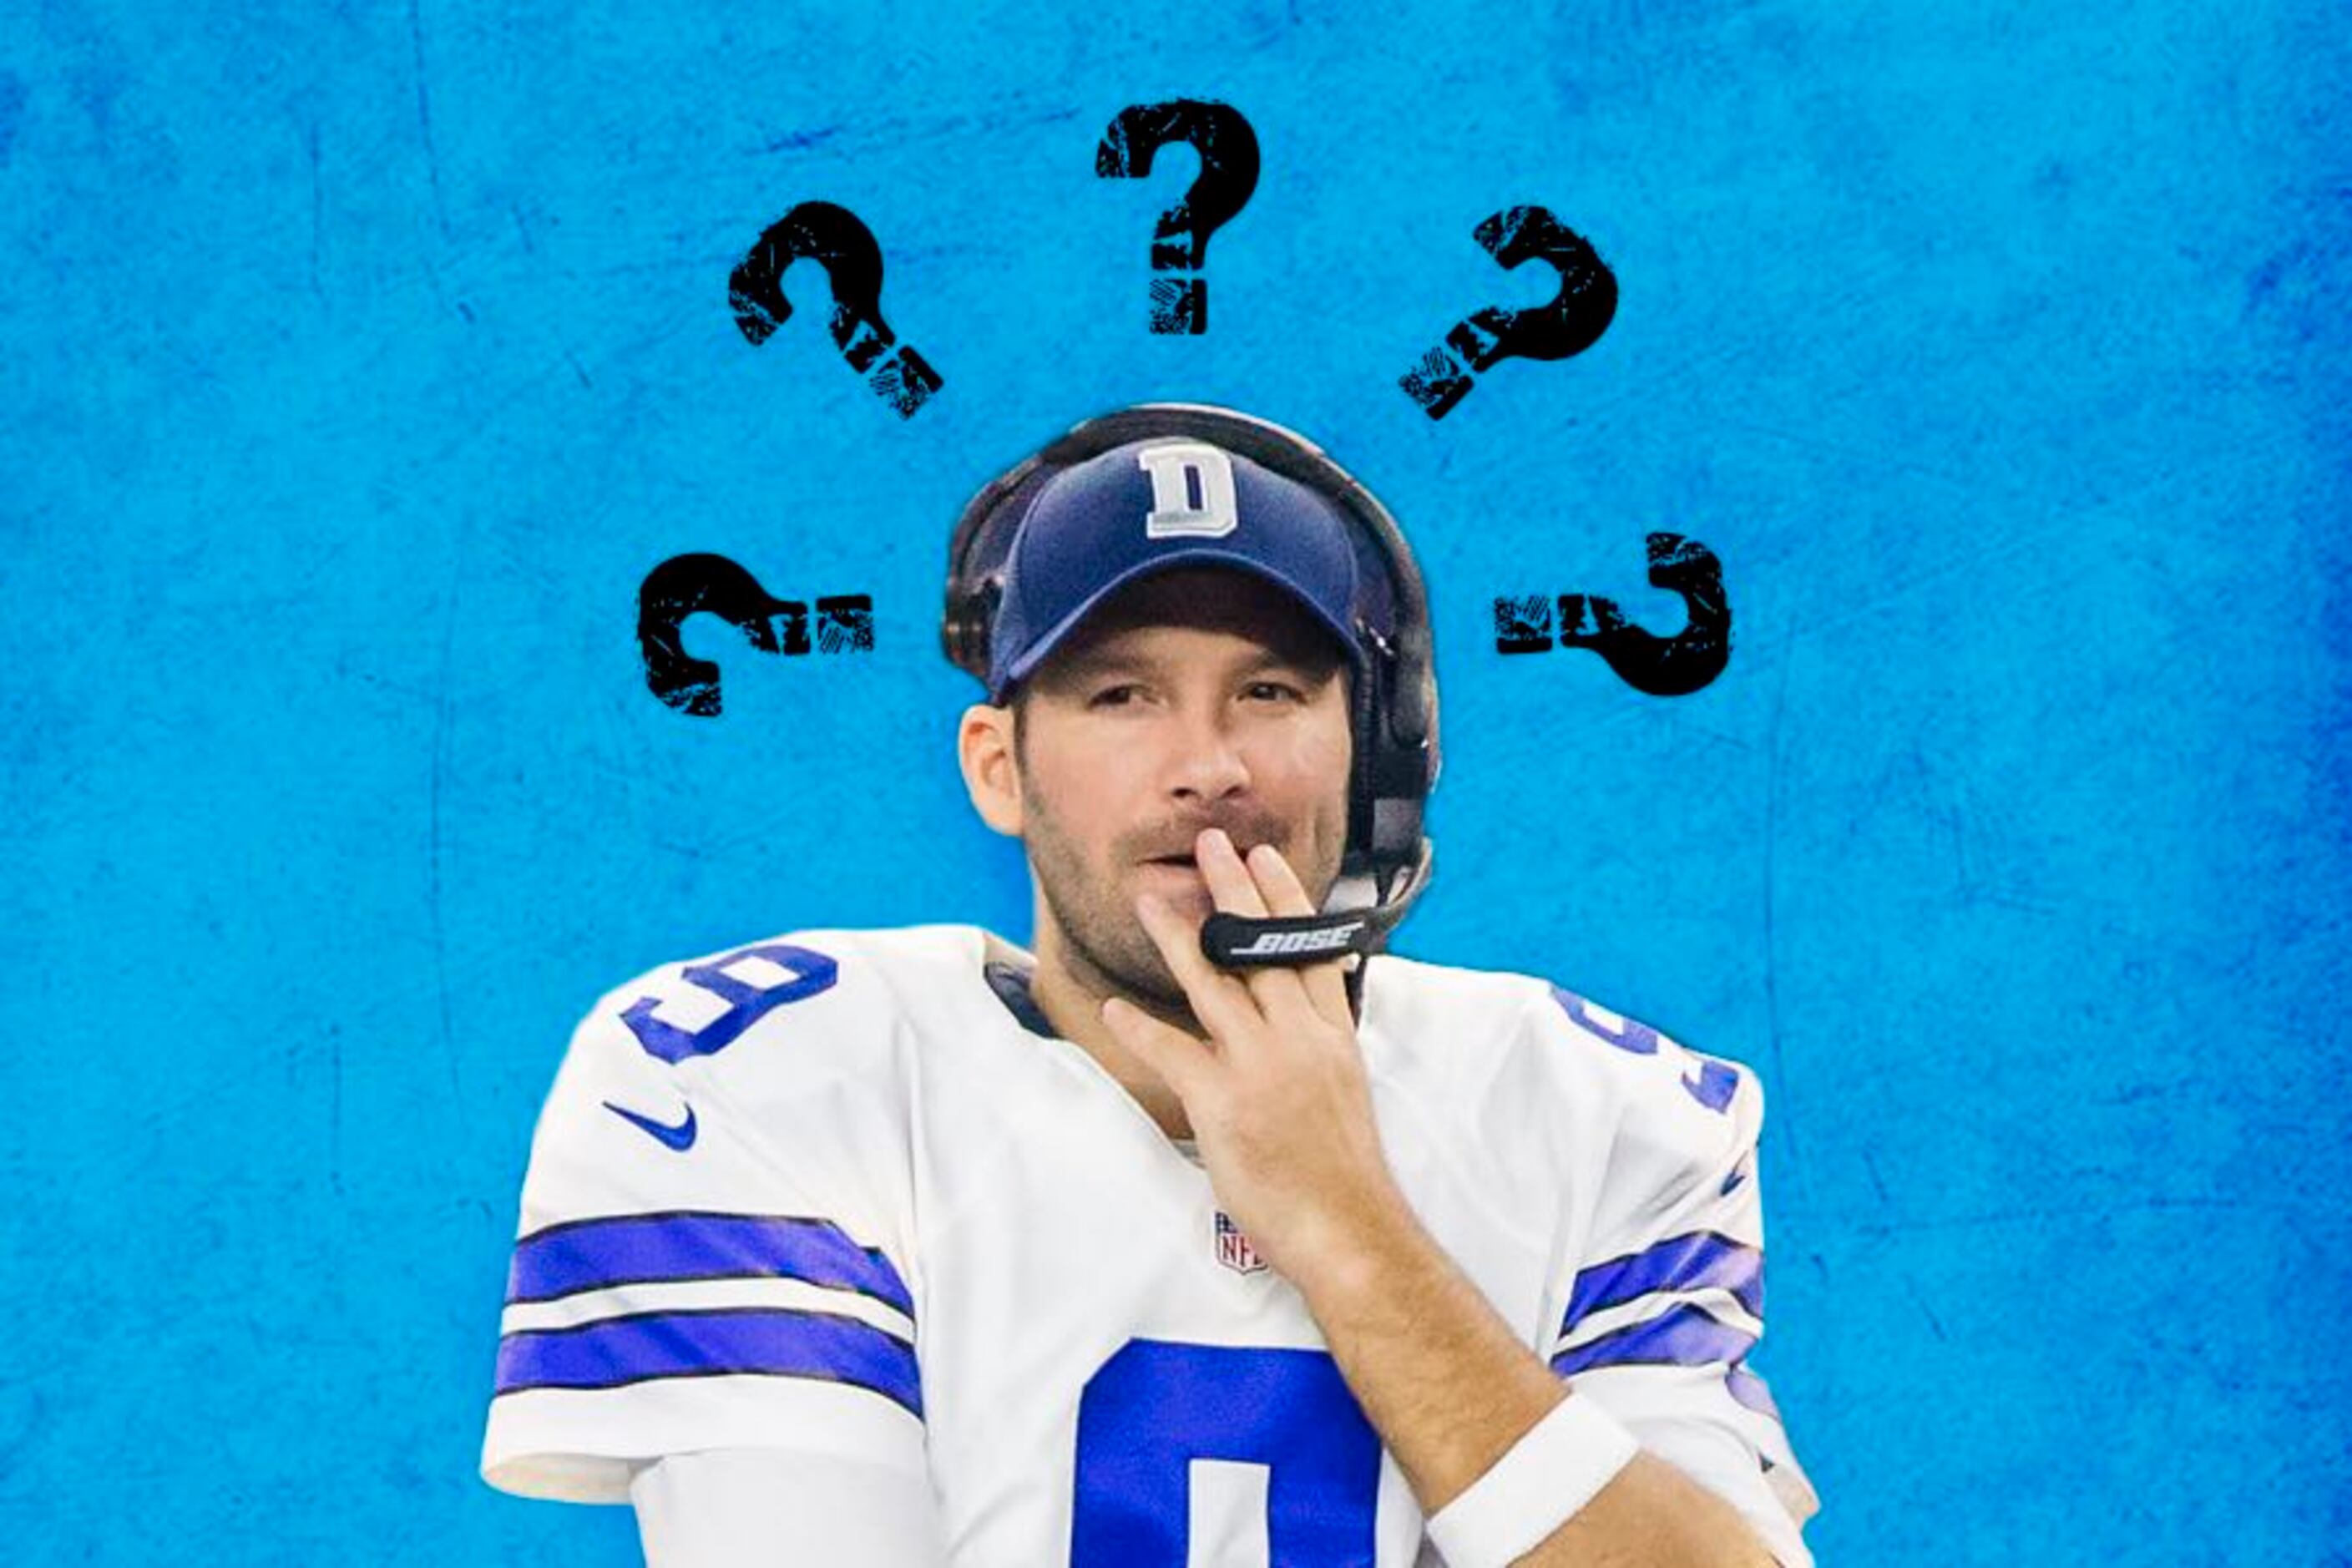 Tony Romo Is Reportedly Retiring From the NFL: Details